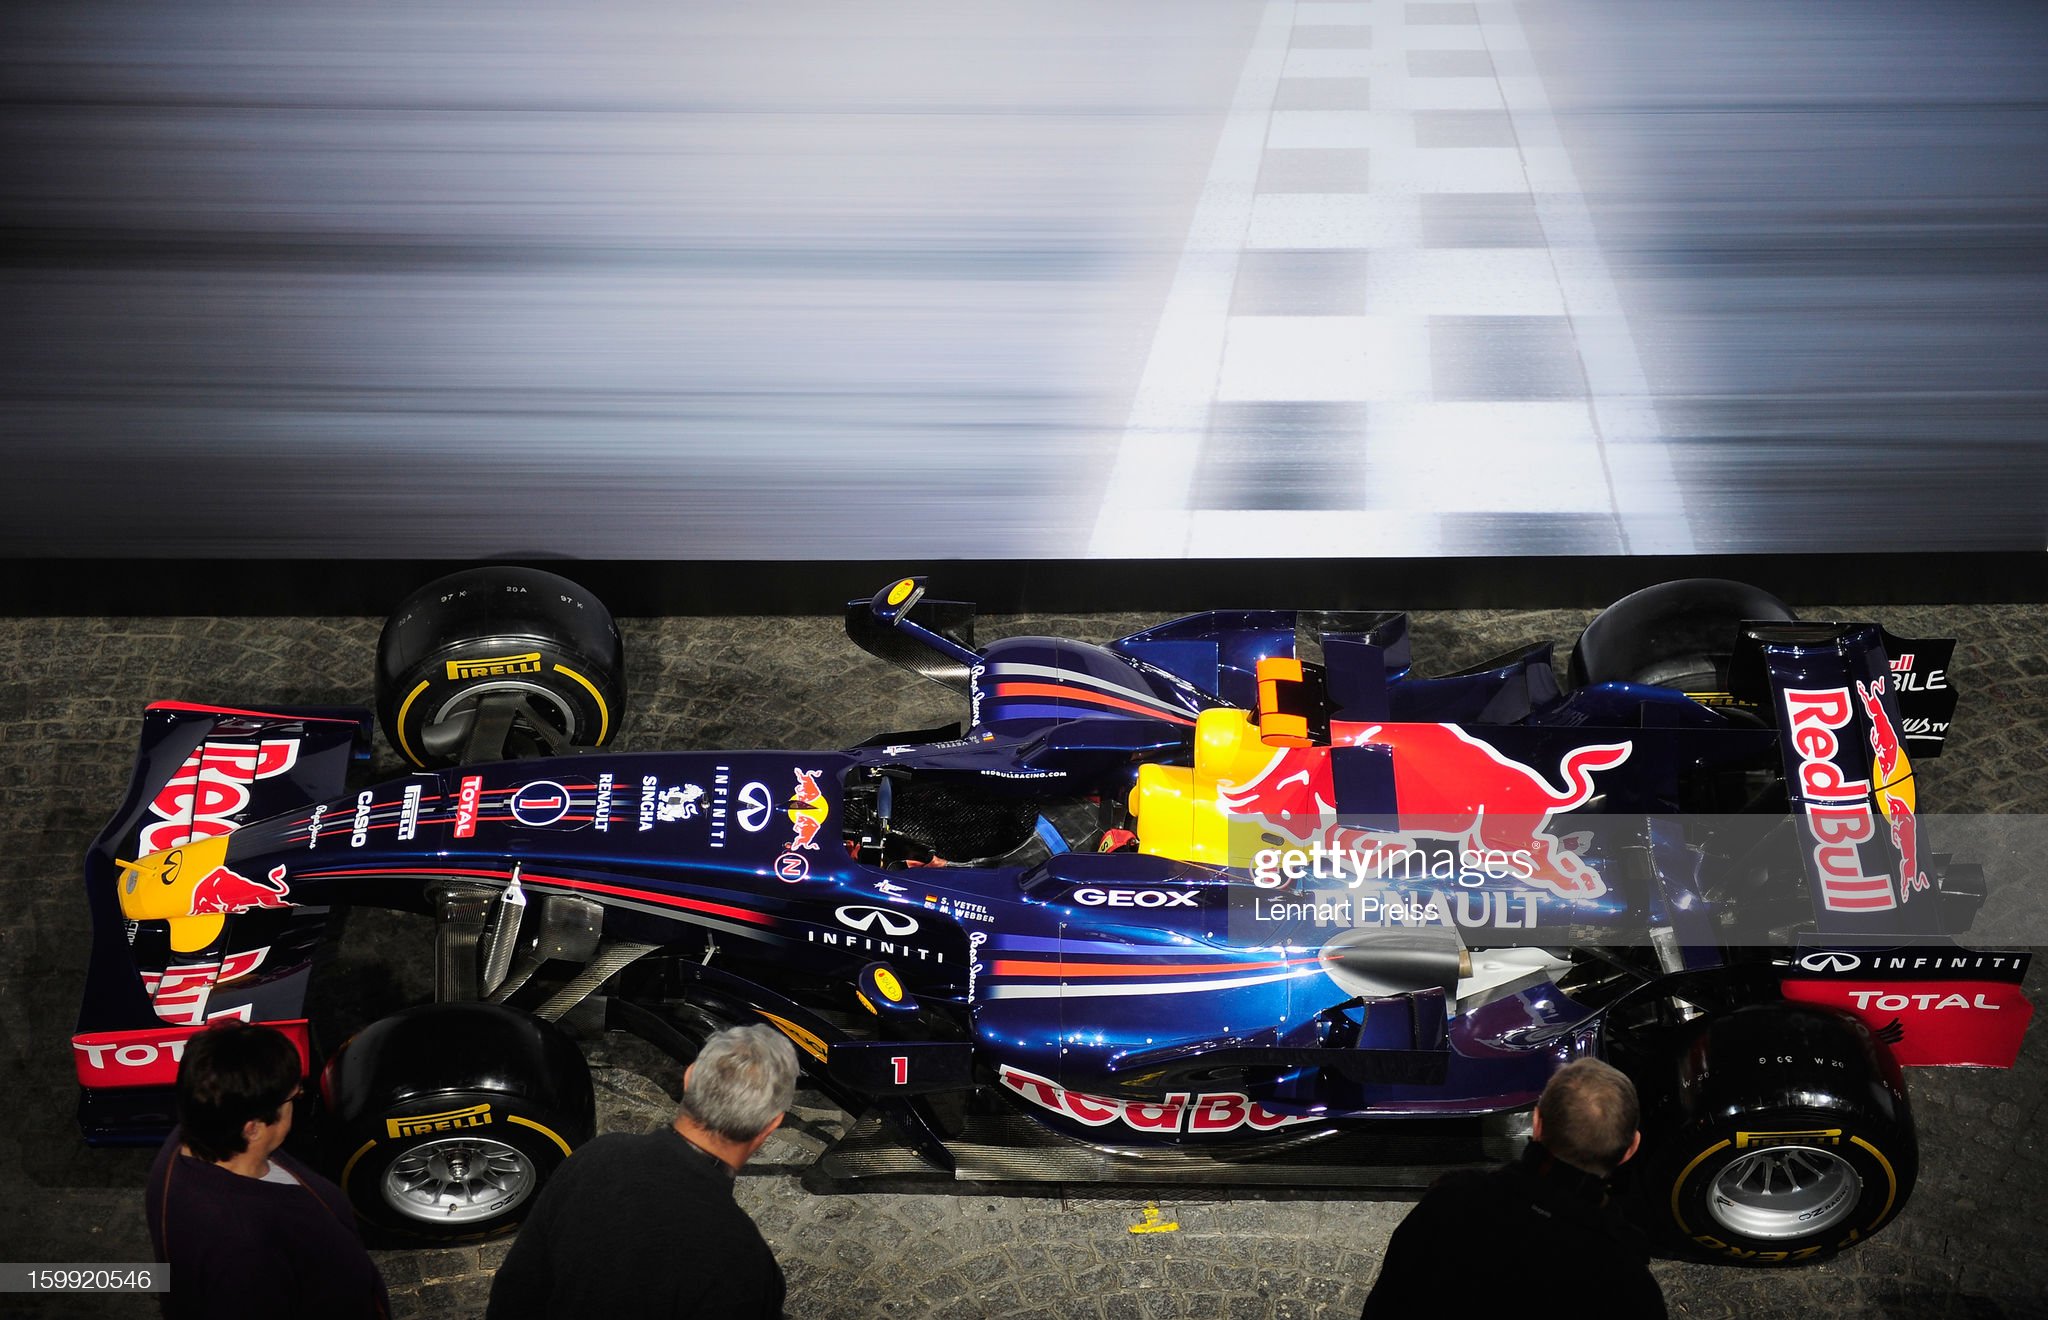 A Red Bull F1 in part sponsored by Siemens is displayed during the Siemens annual general shareholders' meeting at the Olympiahalle on 23 January 2013 in Munich, Germany. 